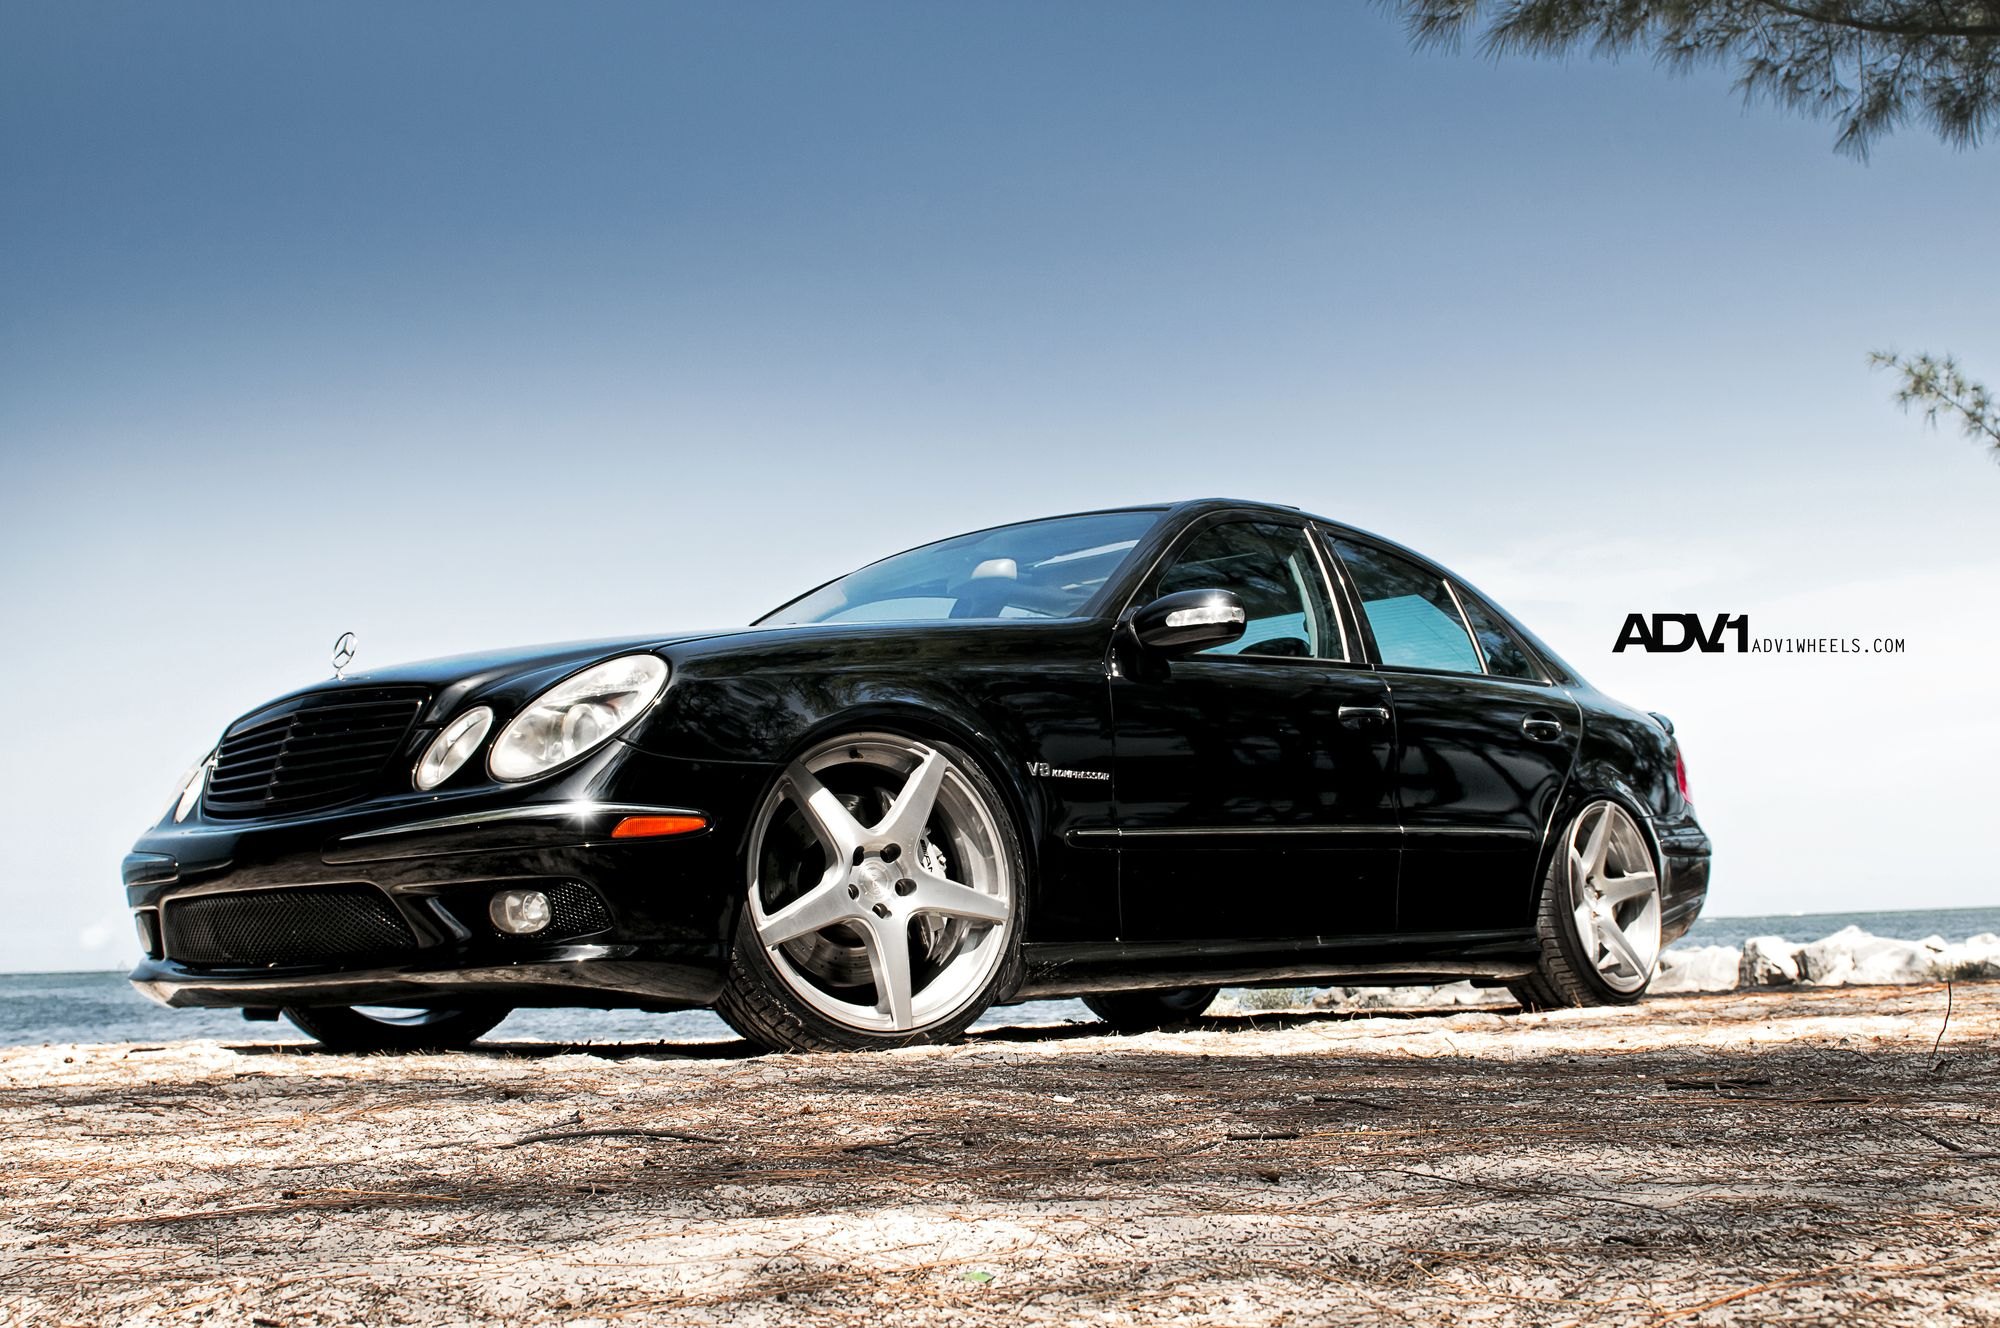 Mercedes E55 With lowered Suspension - Photo by ADV.1